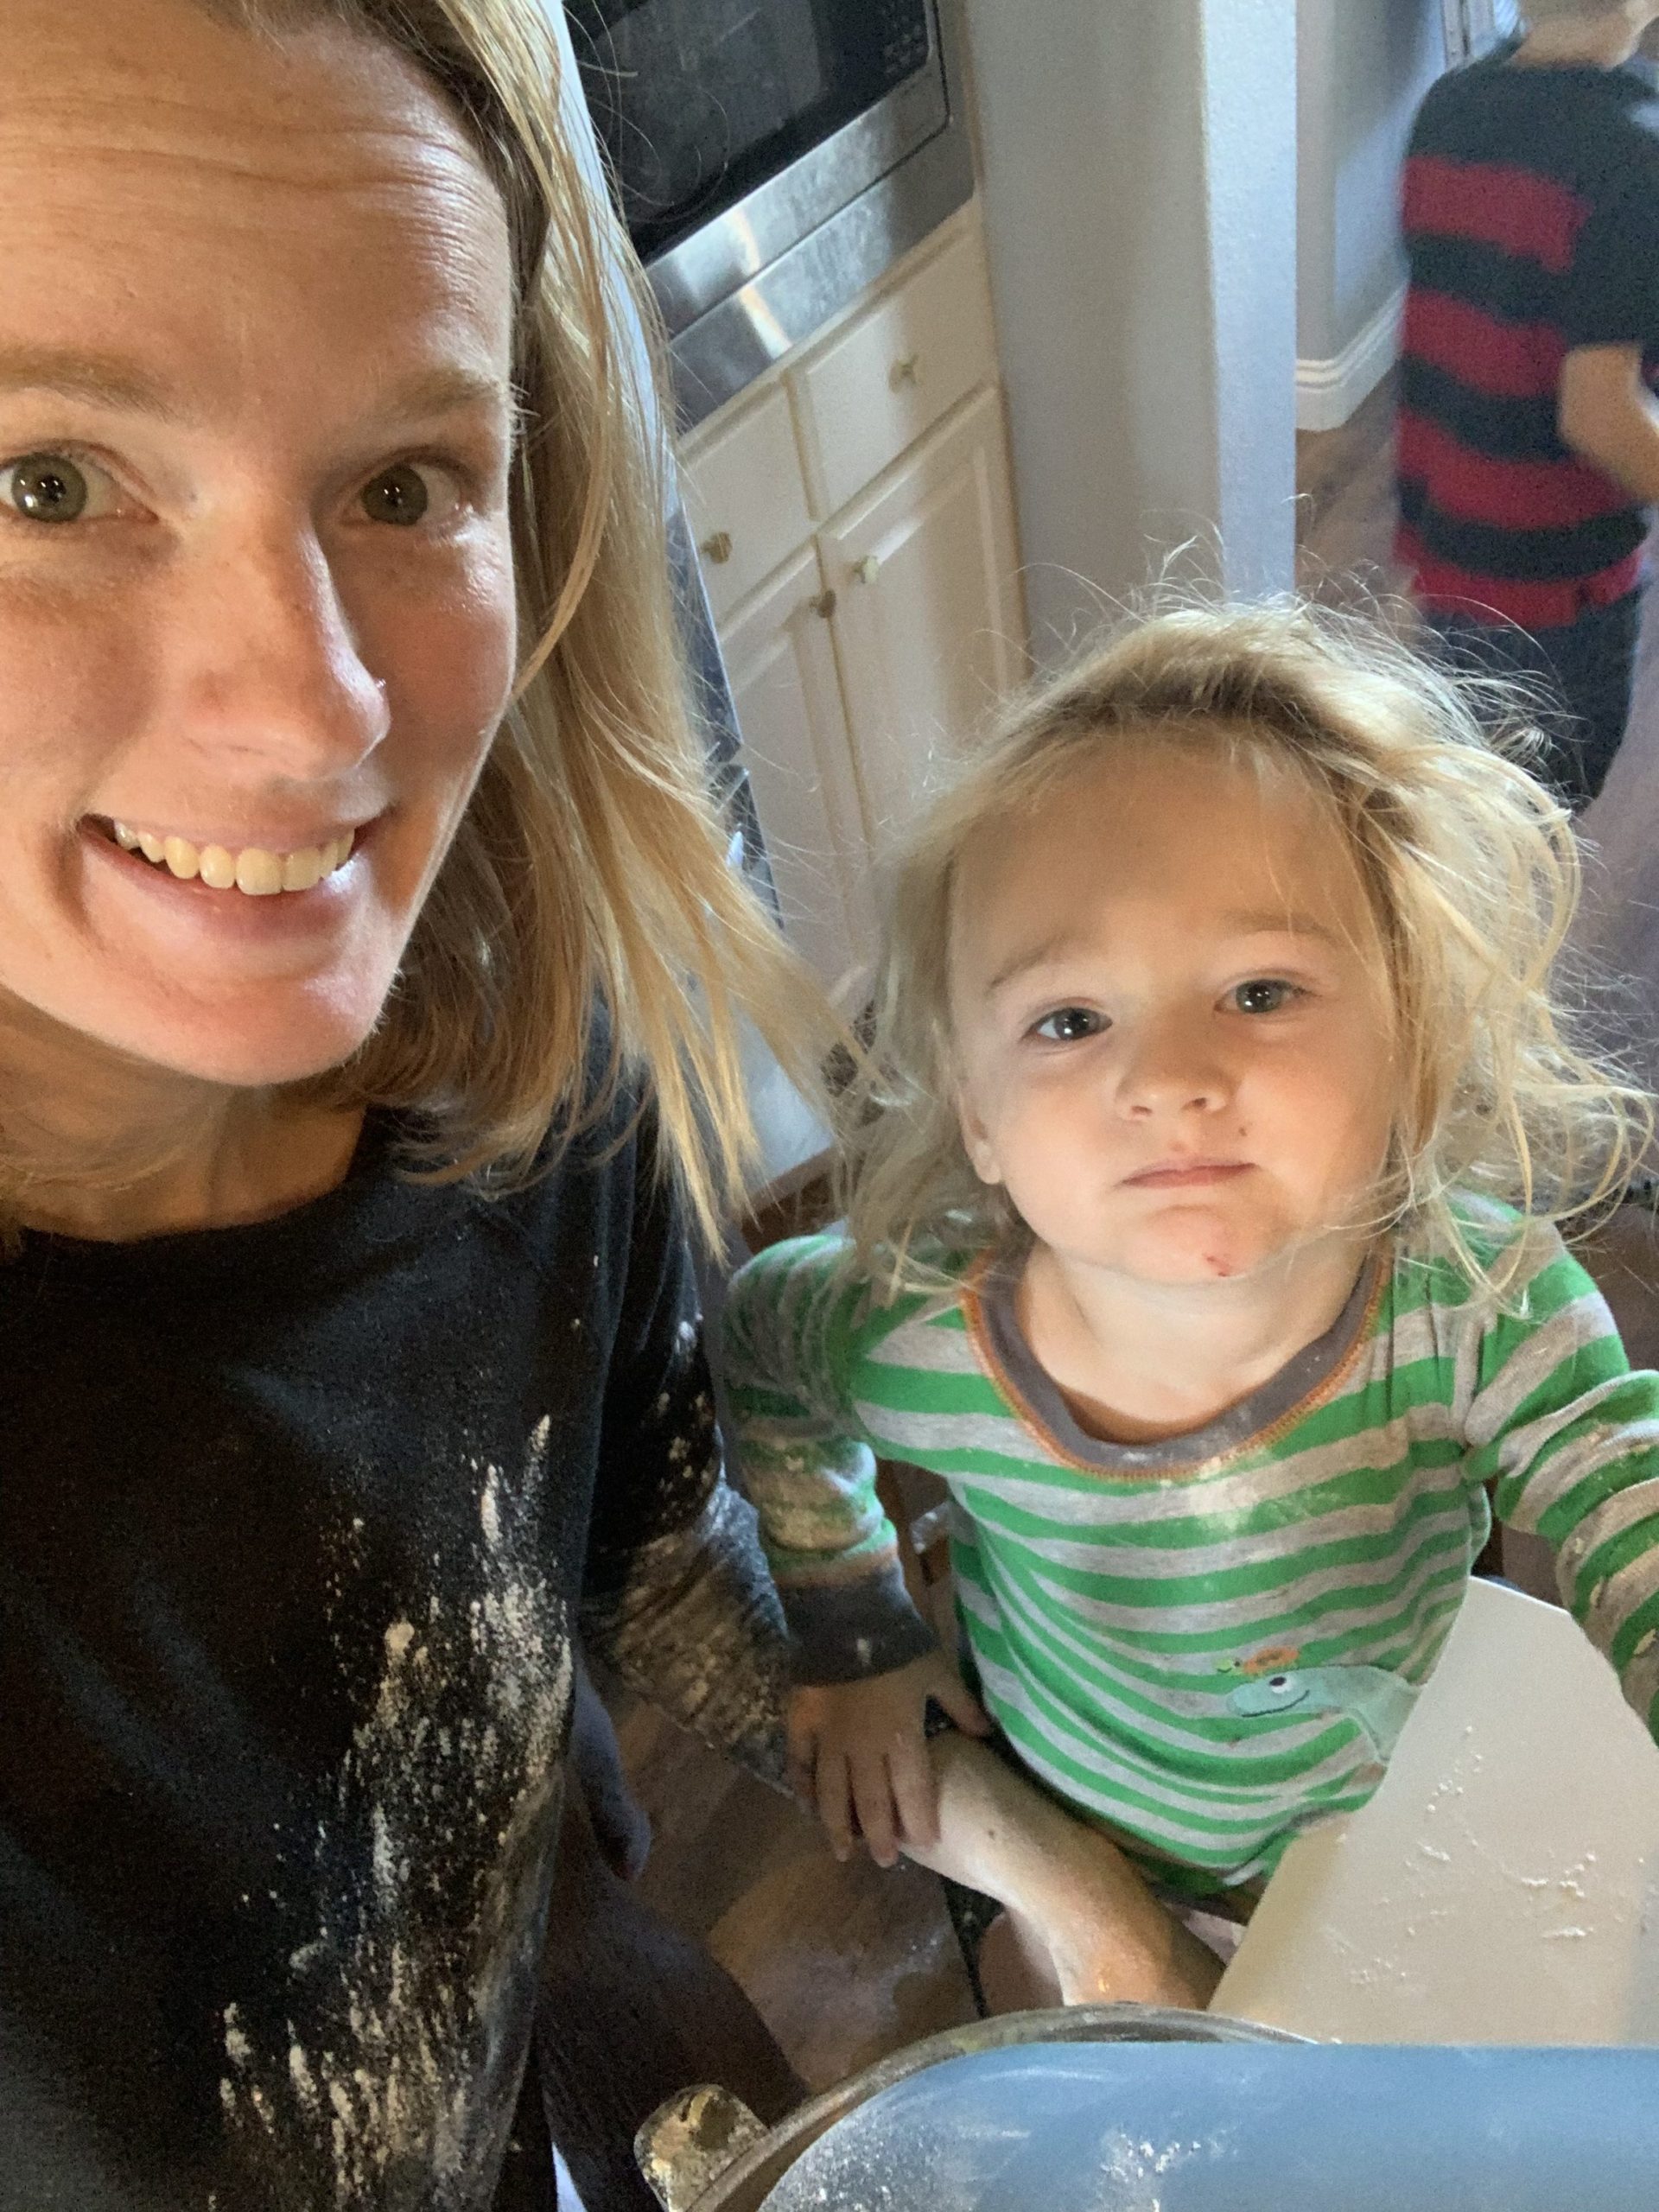 Mother in black shirt covered in flour with her toddler son standing next to her on a chair helping her in  the kitchen